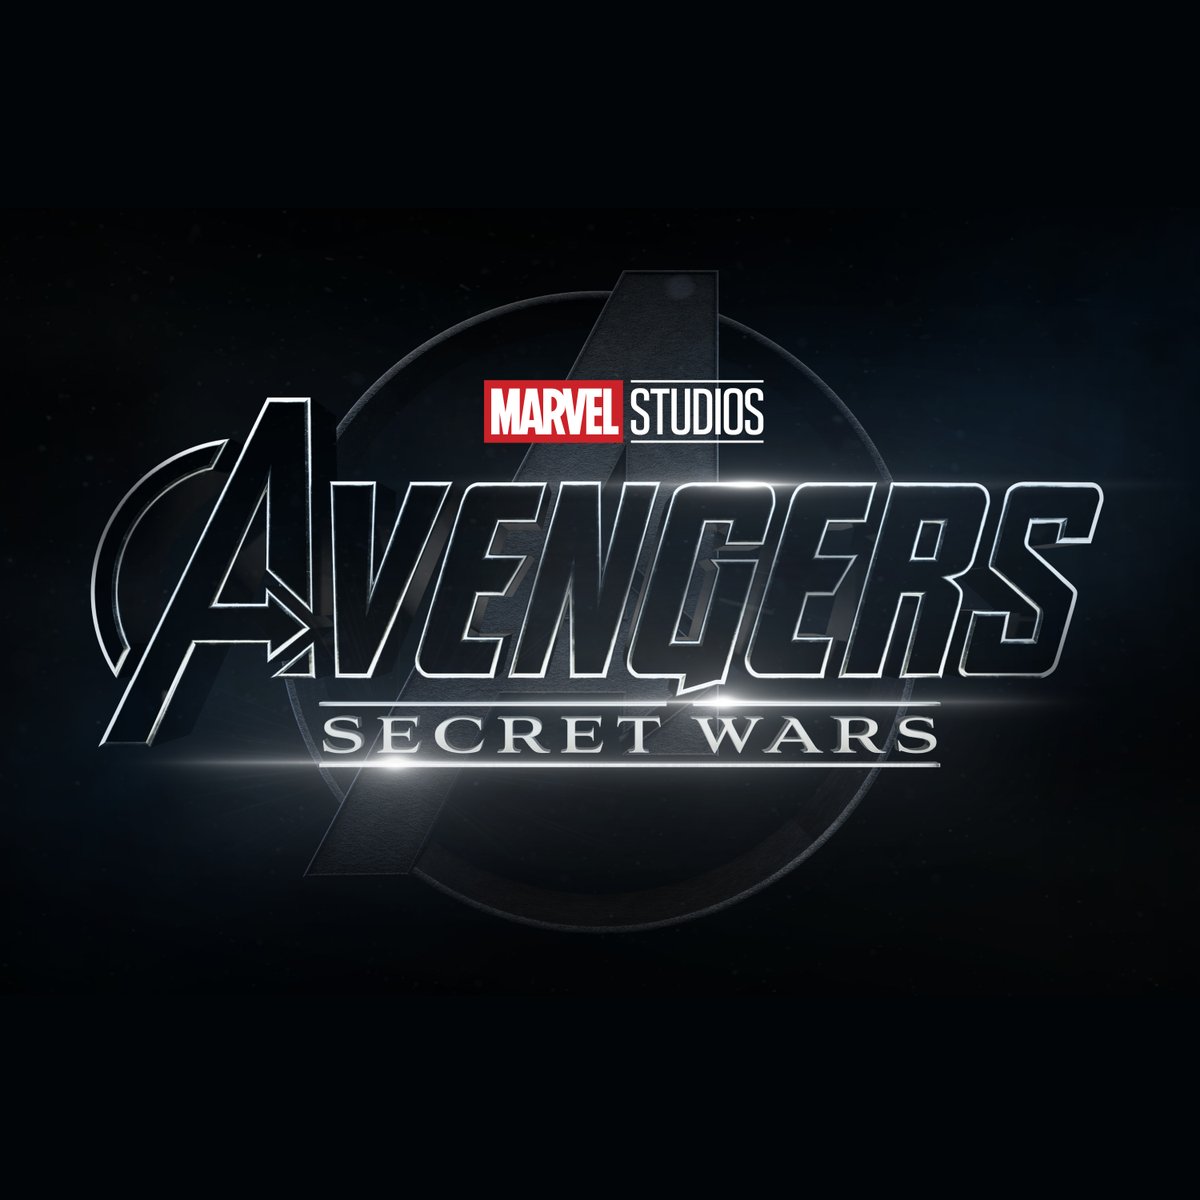 Just announced in Hall H: Marvel Studios' Avengers: Secret Wars, in theaters November 7, 2025. #SDCC2022